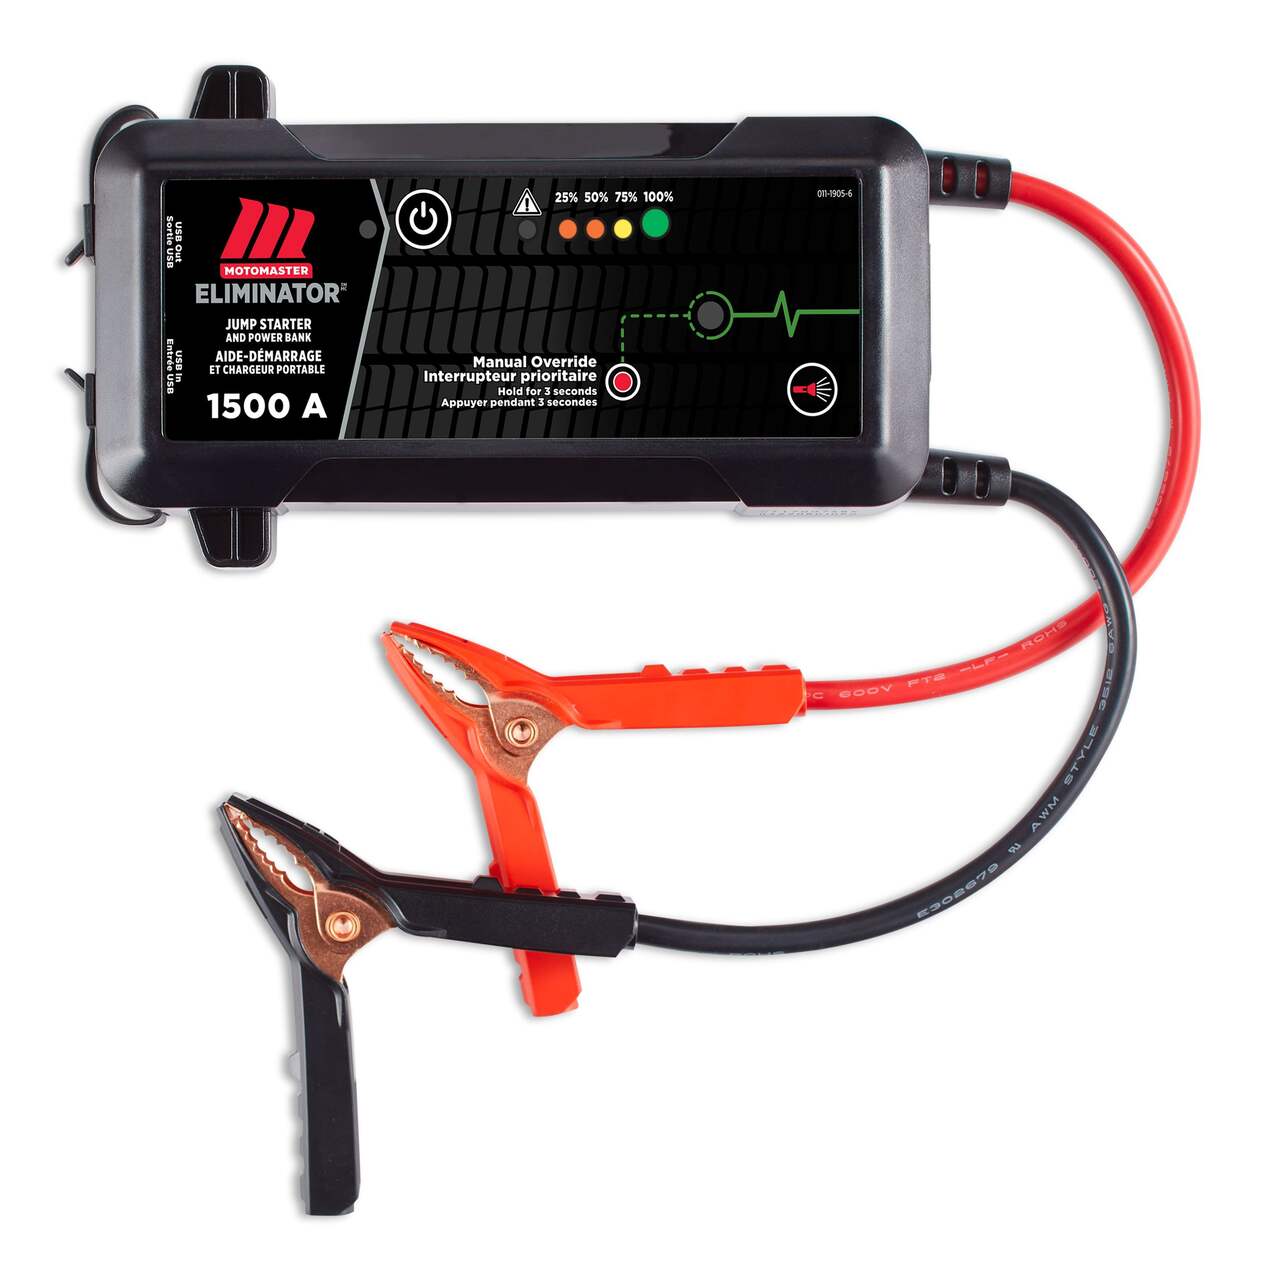 https://media-www.canadiantire.ca/product/automotive/light-auto-parts/auto-battery-accessories/0111905/motomaster-eliminator-1500a-lithium-jump-starter-12e5fc86-985a-4948-9b03-297aa9ecfd30-jpgrendition.jpg?imdensity=1&imwidth=640&impolicy=mZoom